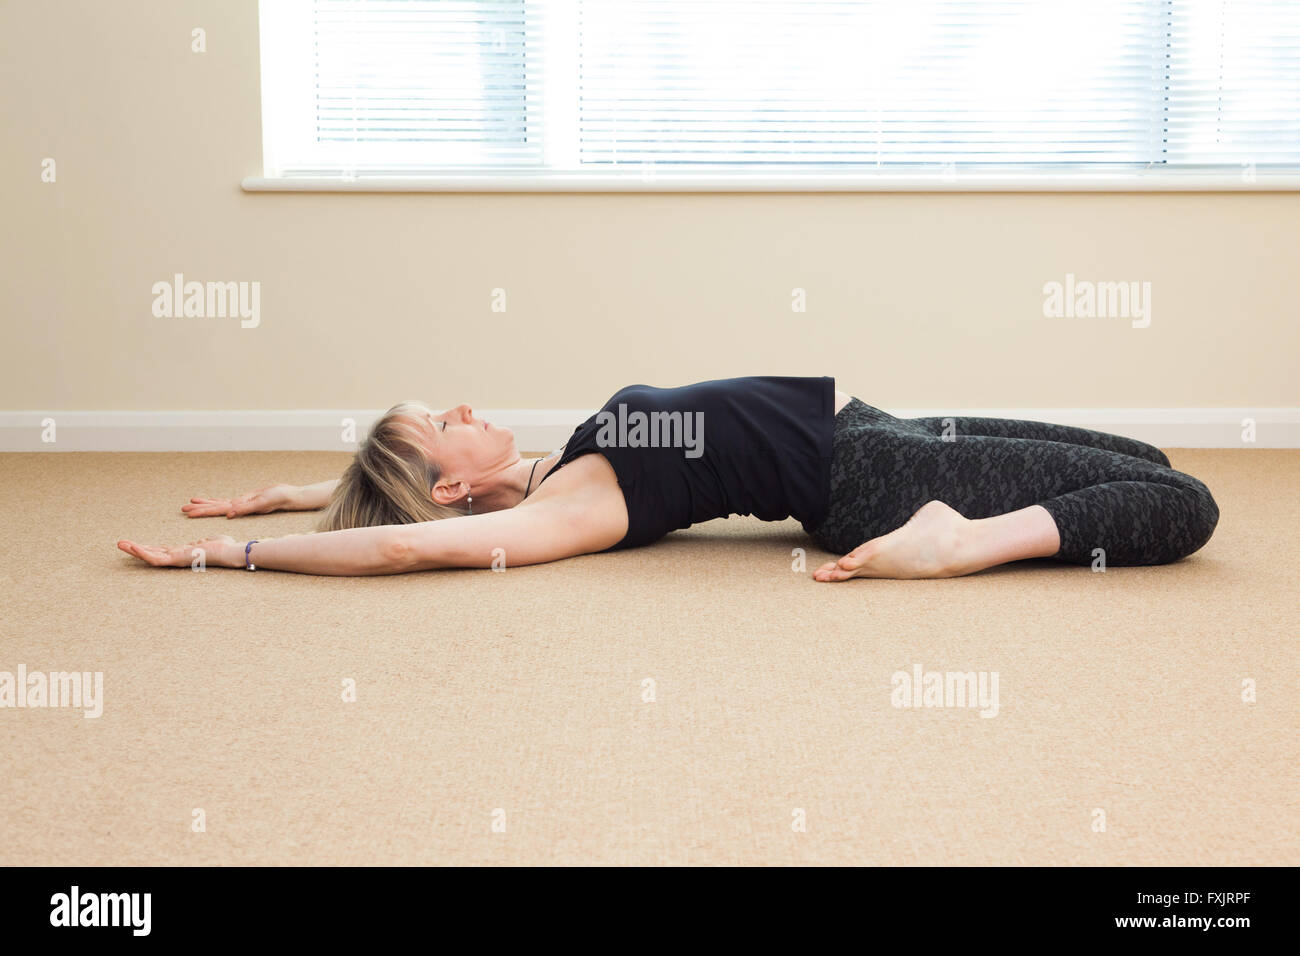 female in a yoga pose indoors Stock Photo